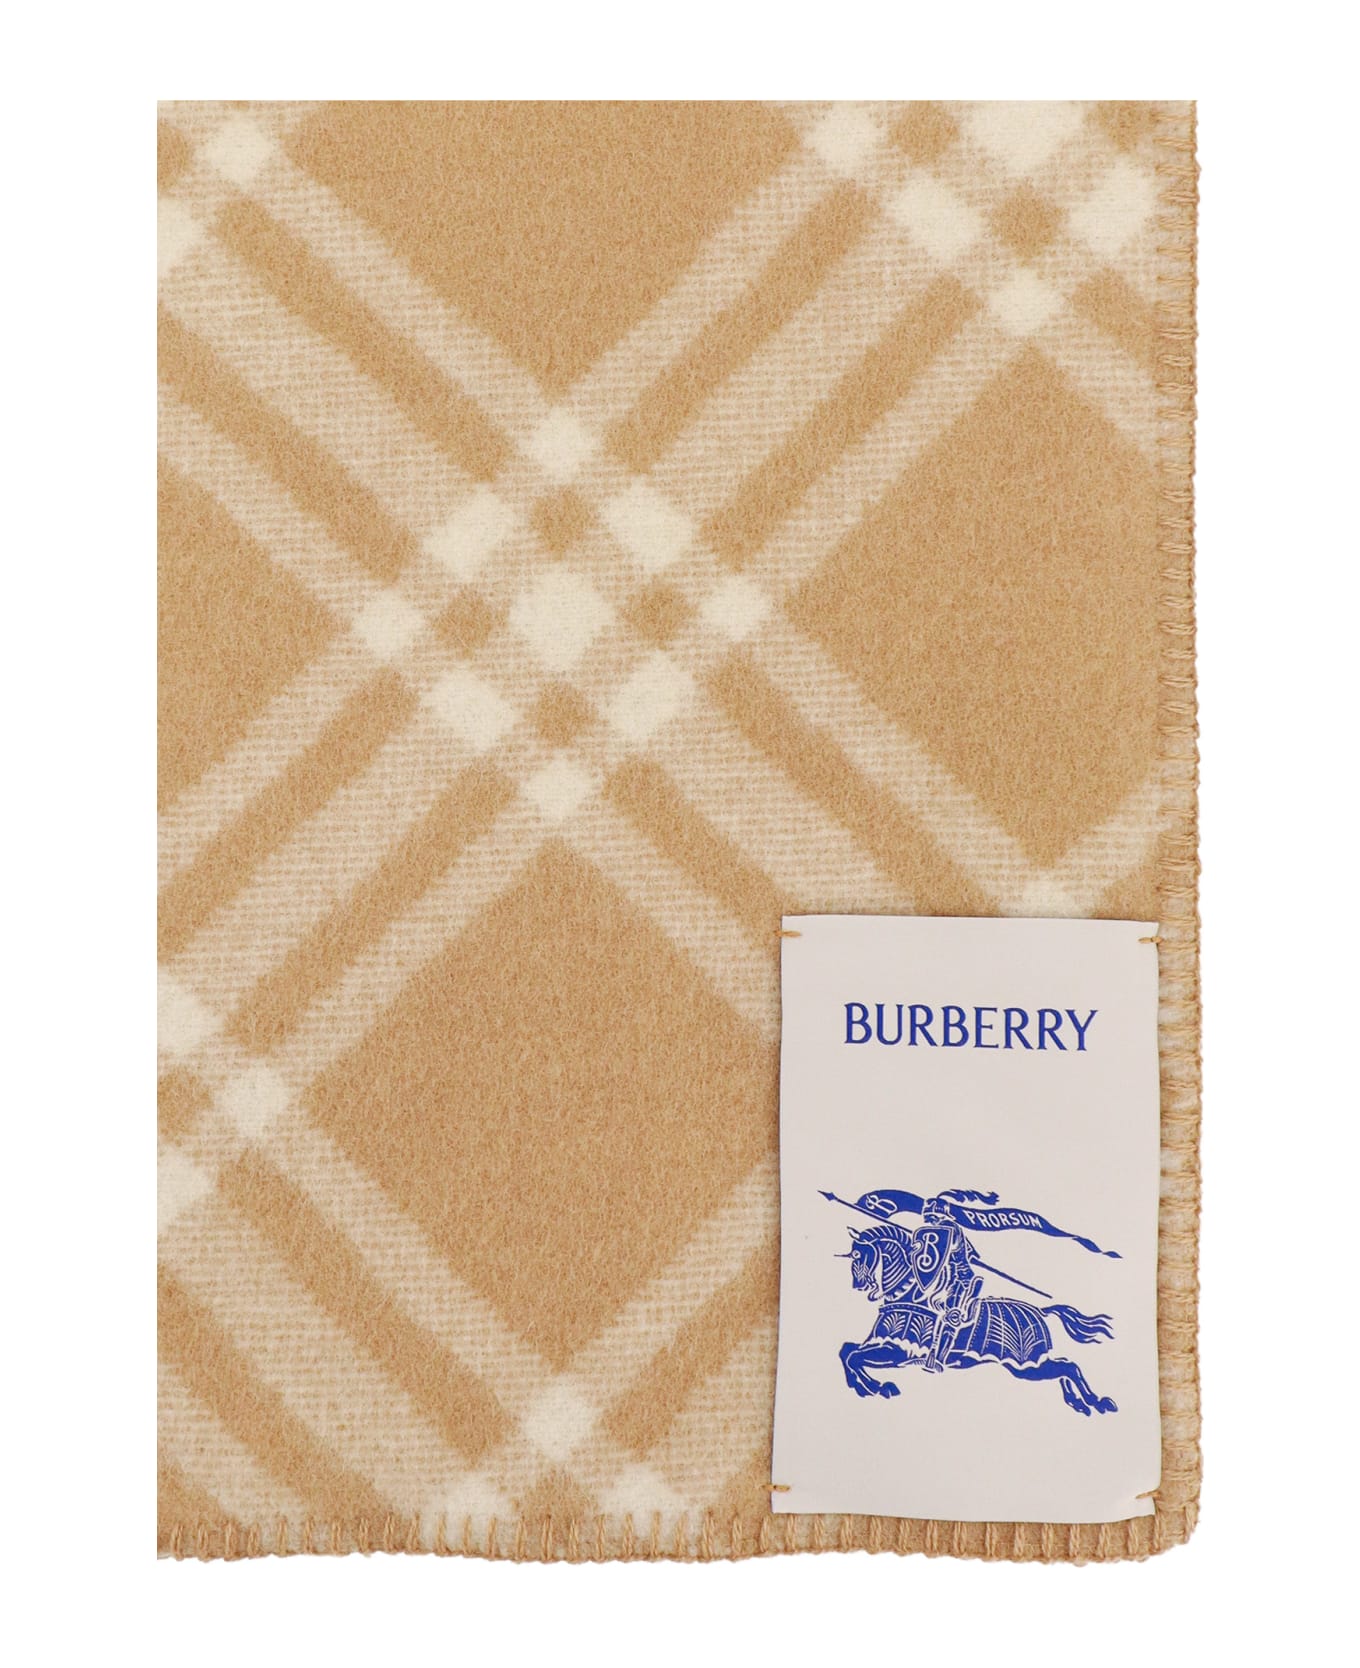 Burberry Archive Beige Wool Scarf With Vintage Check Pattern - Beige スカーフ